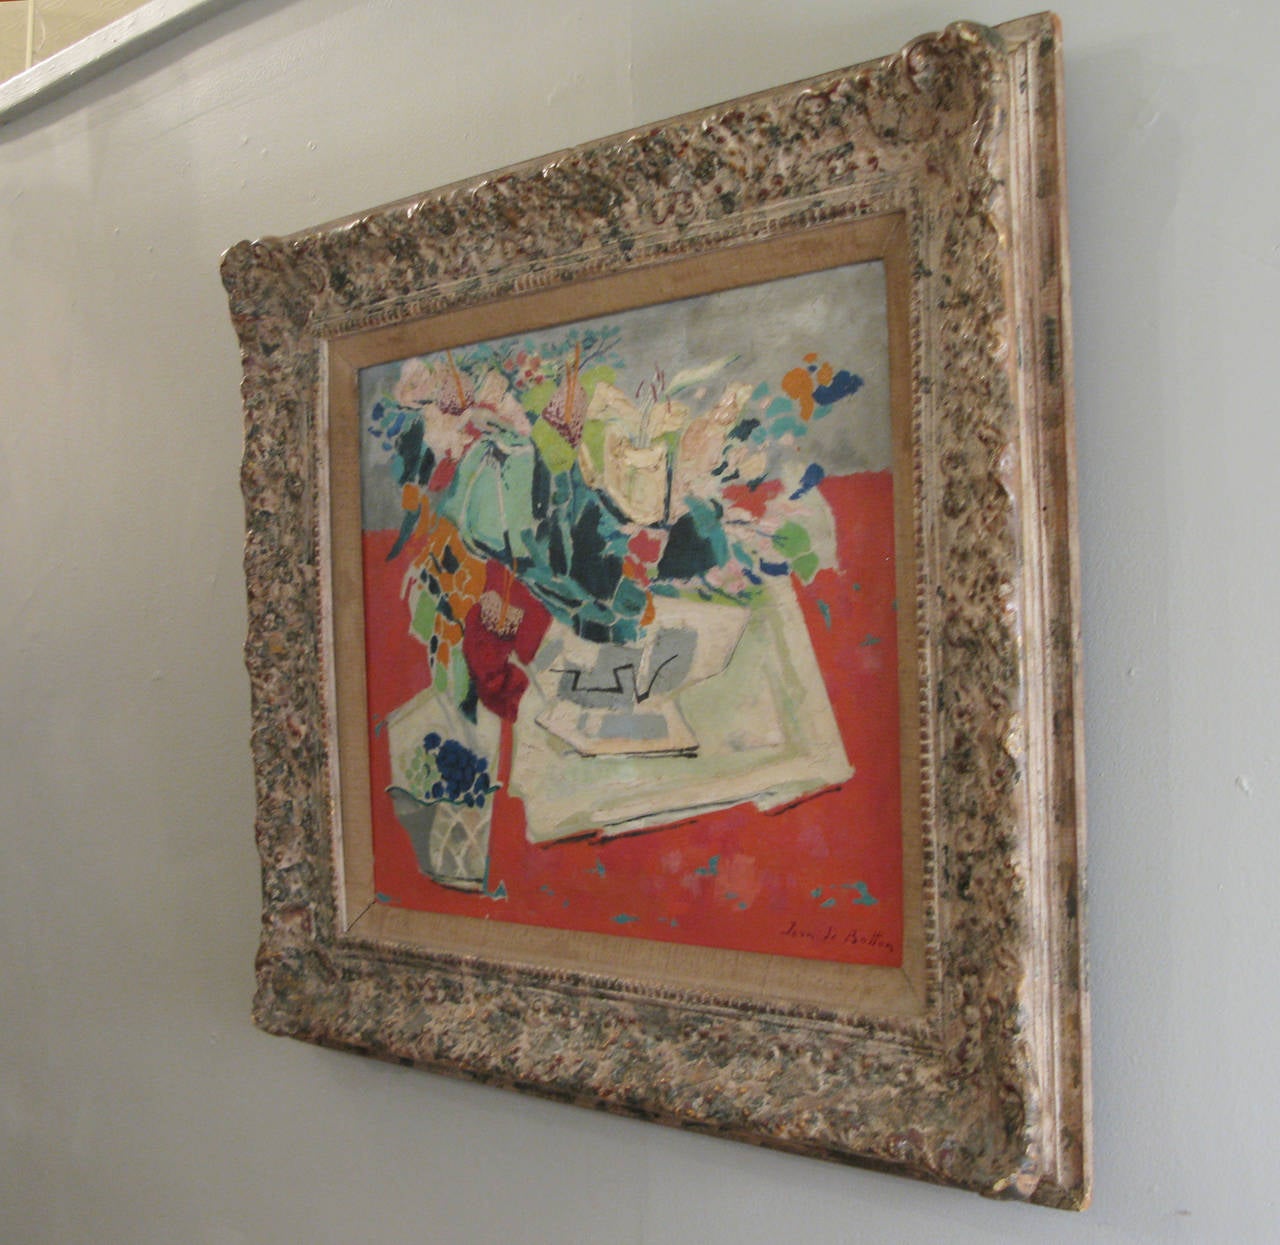 Charming abstract cubist still-life oil painting by French artist Jean de Botton, wonderful composition and color, in its original hand-carved frame. 

Size of the frame is 30 H x 34 W.